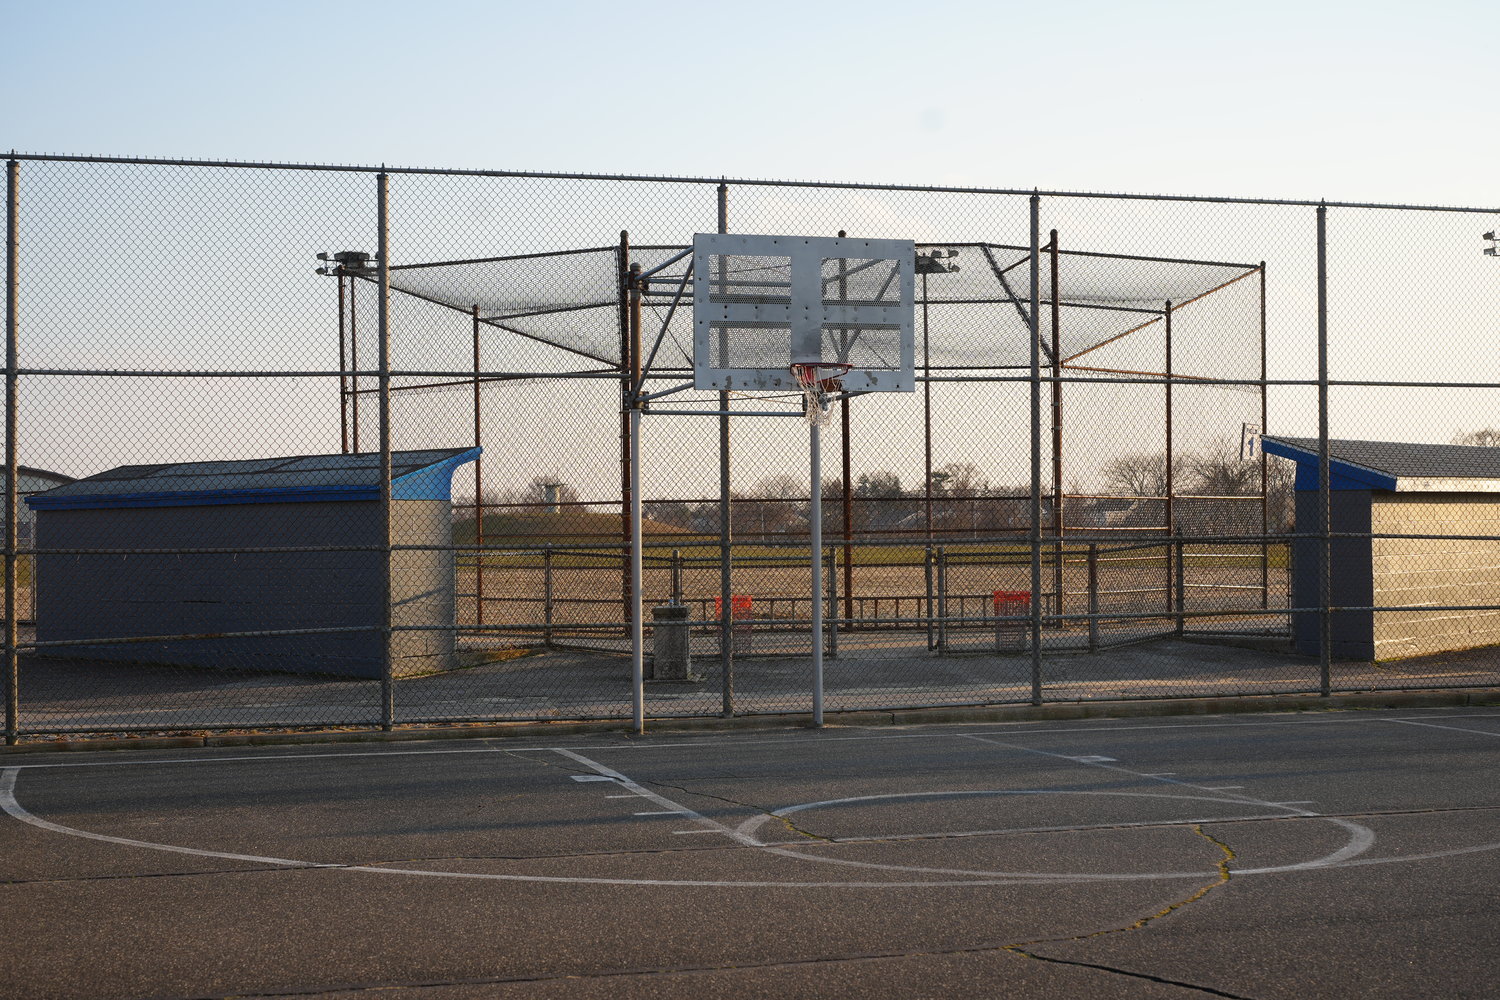 The basketball courts, above, will be redone. The fencing around the courts will be upgraded.